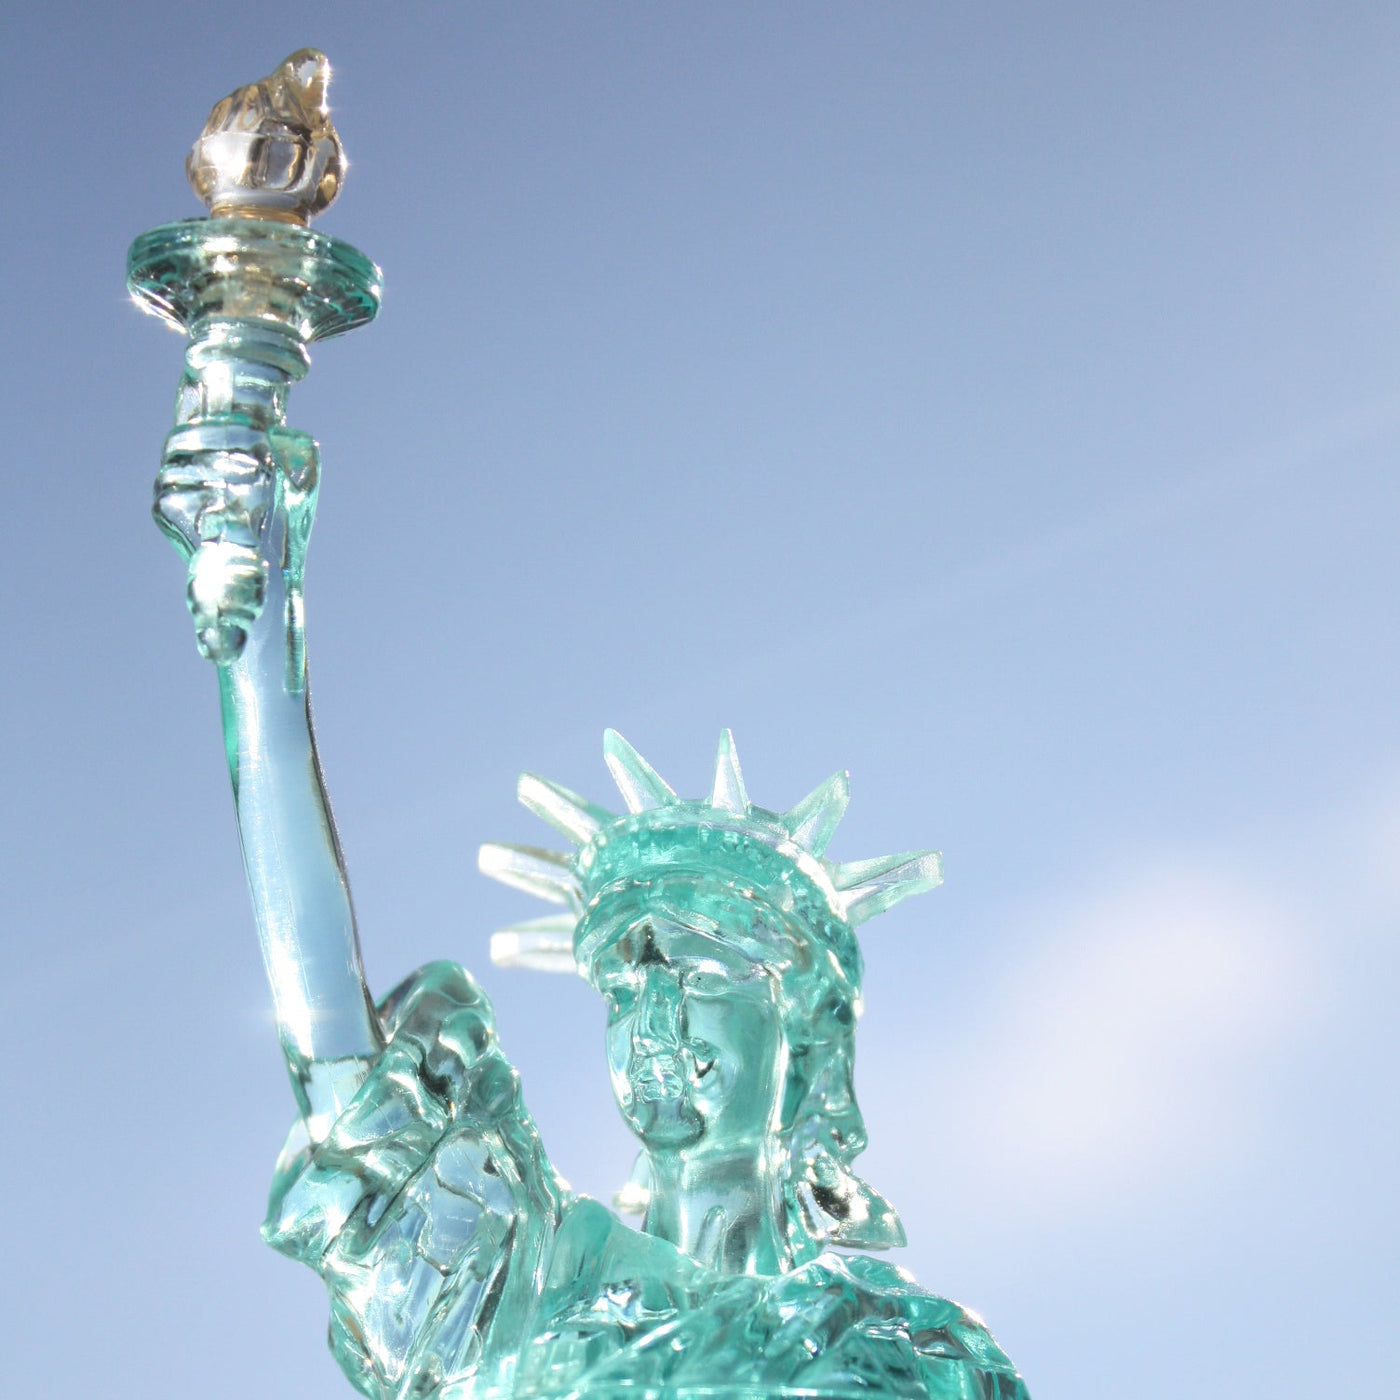 3D Statue Liberty Crystal Puzzle